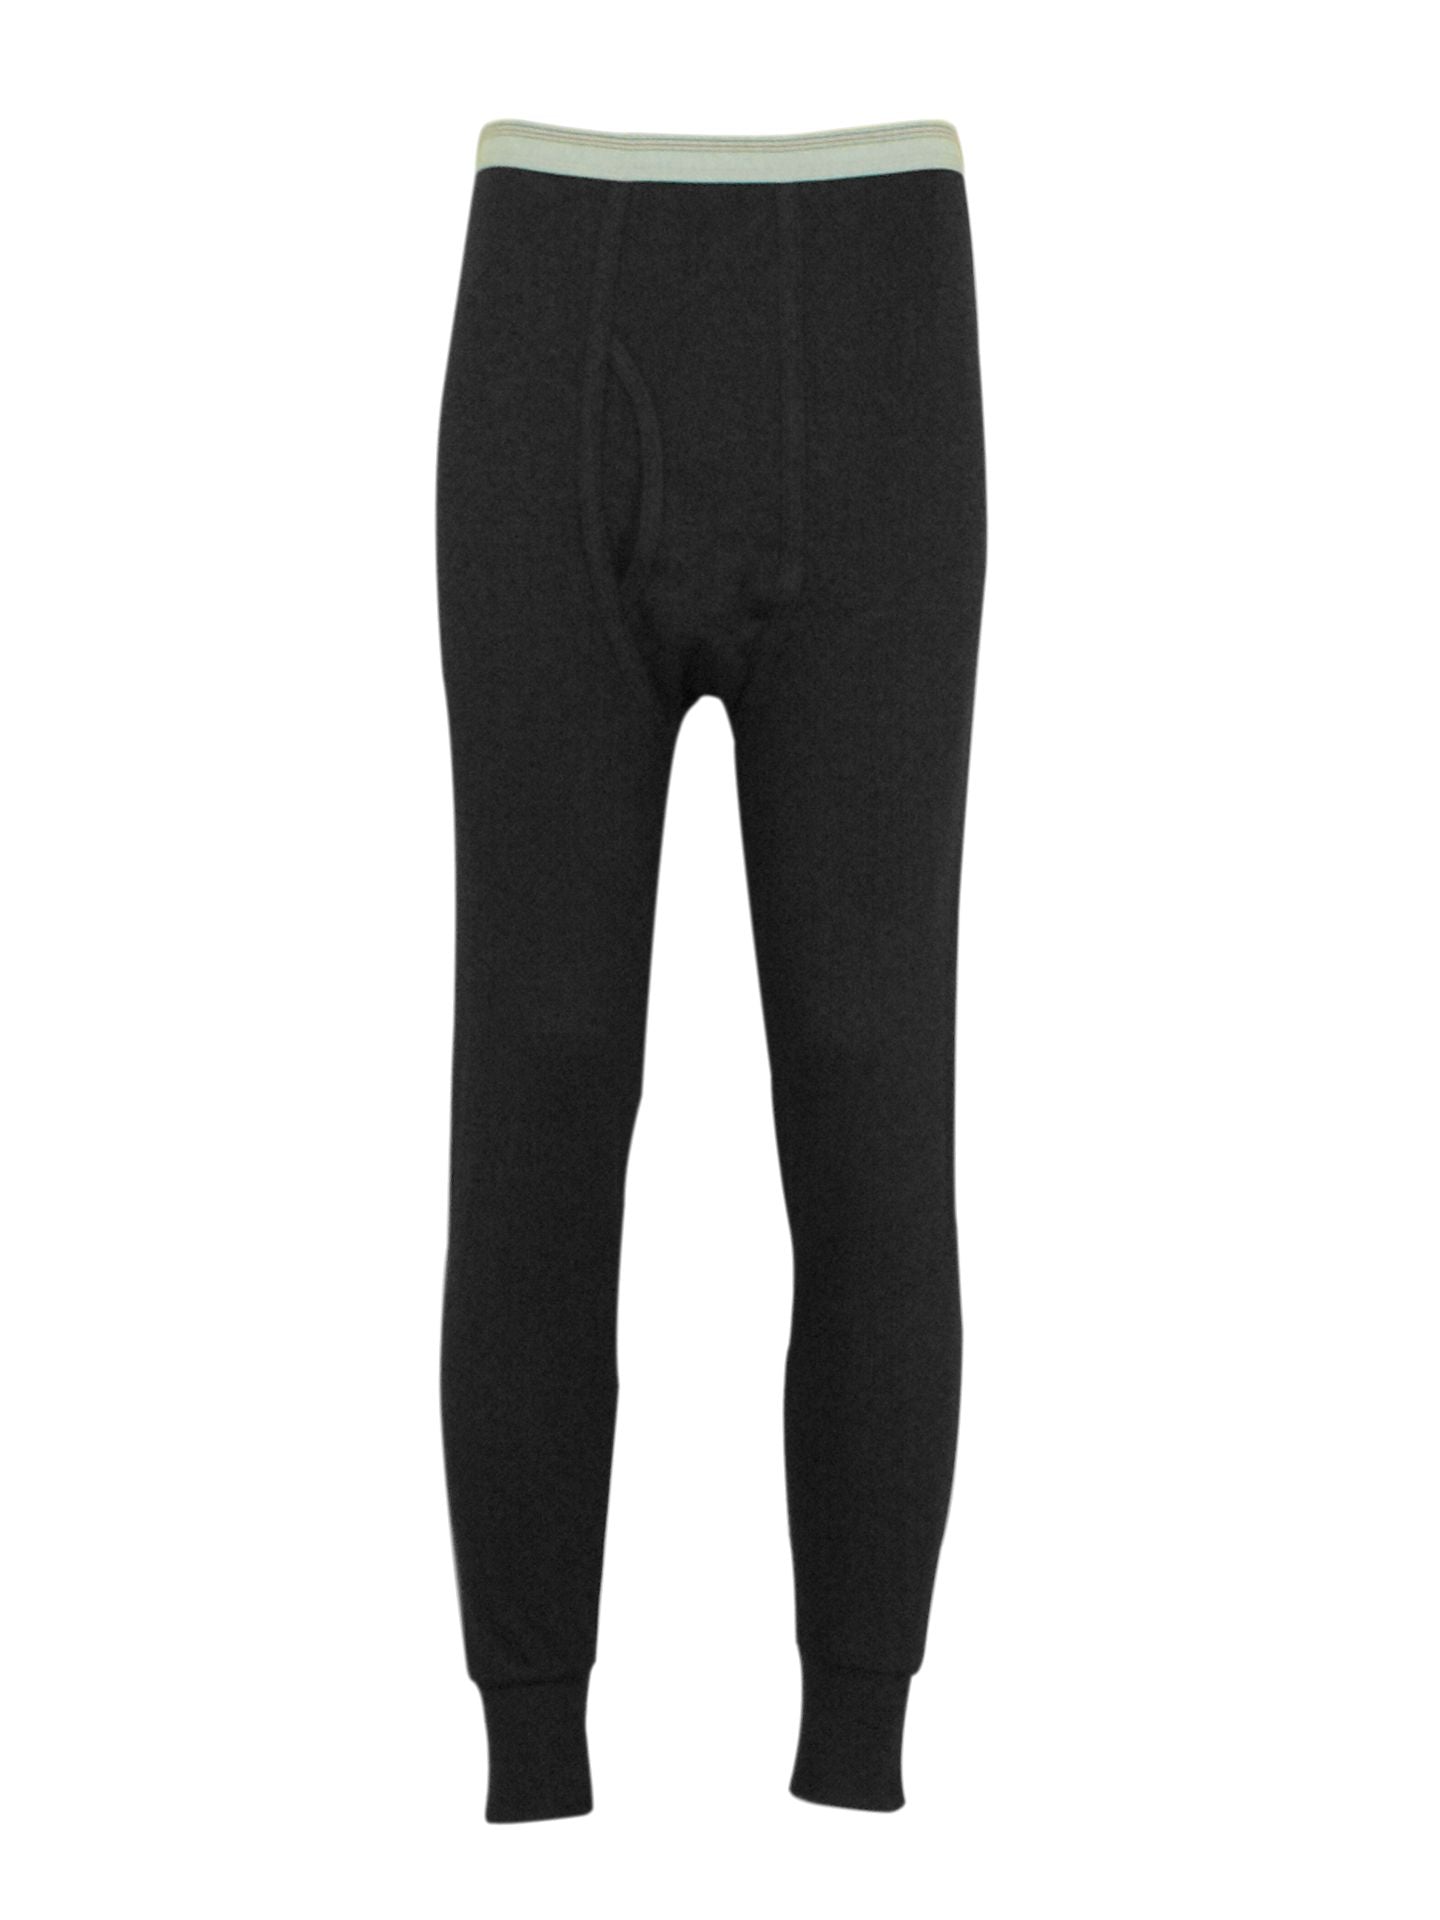 ICETEX Performance Thermal Pant